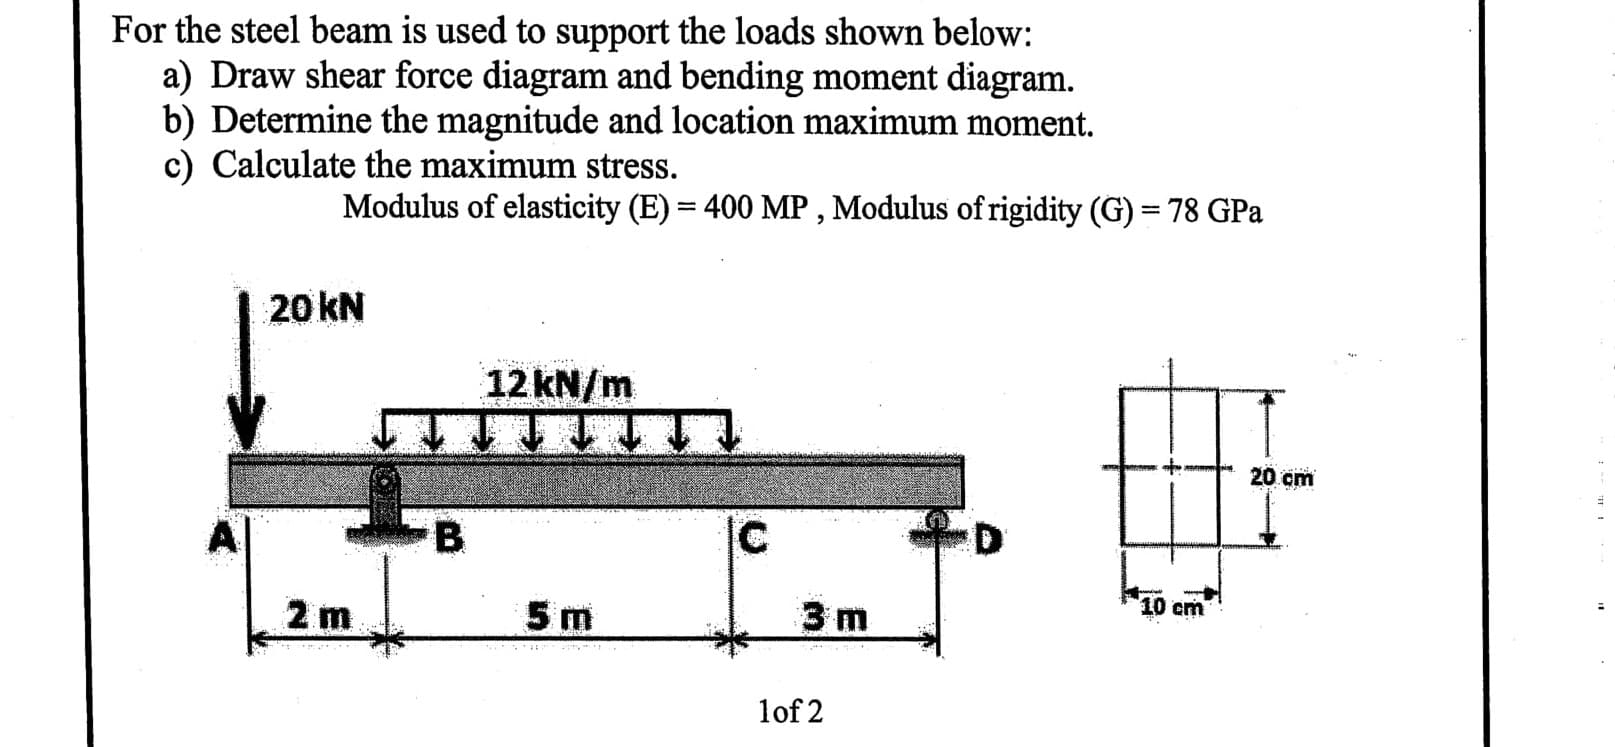 For the steel beam is used to support the loads shown below:
a) Draw shear force diagram and bending moment diagram.
b) Determine the magnitude and location maximum moment.
c) Calculate the maximum stress.
Modulus of elasticity (E) = 400 MP , Modulus of rigidity (G) = 78 GPa
